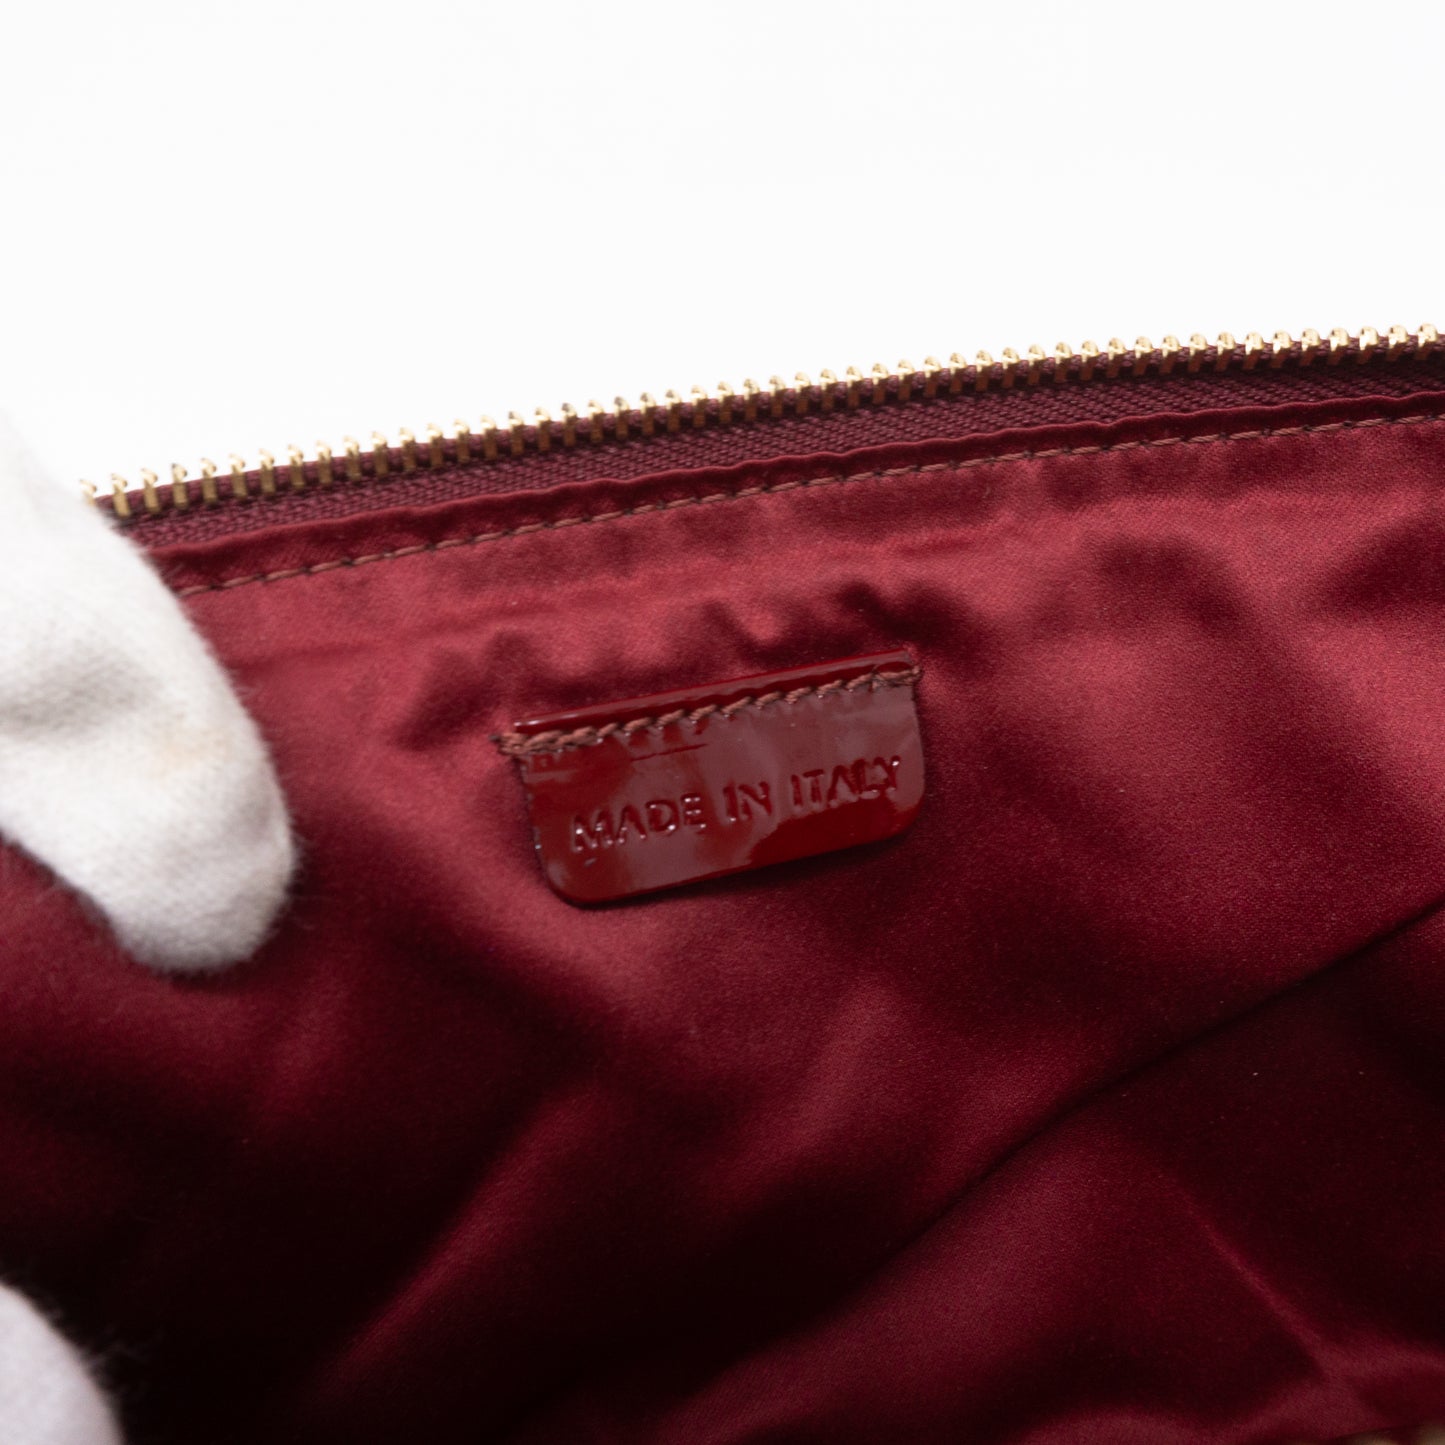 Quilted Clutch Burgundy Patent Leather